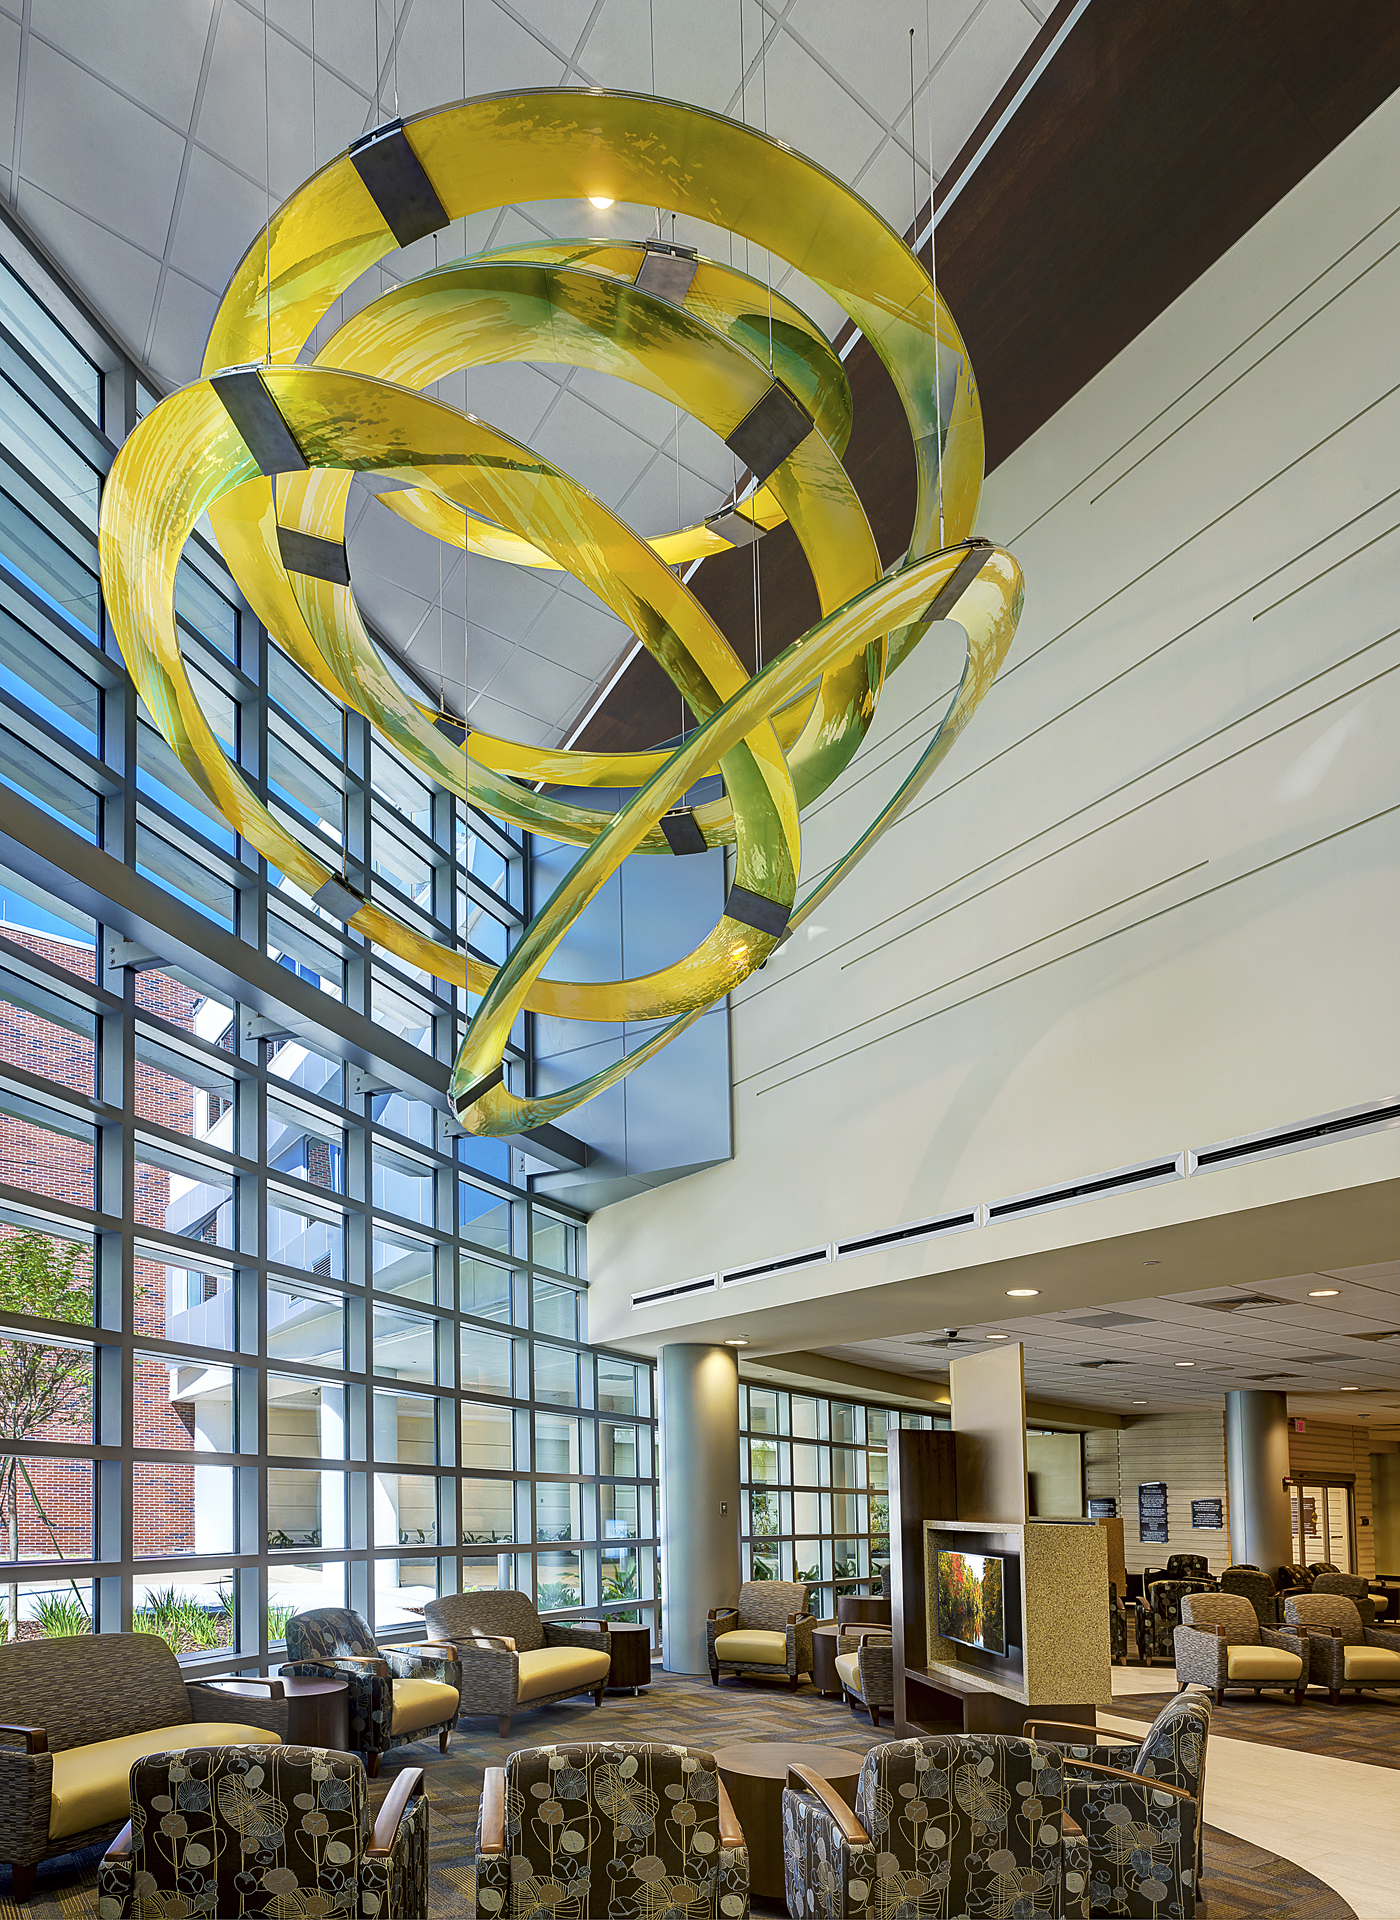 Suspended blown glass lobby sculpture